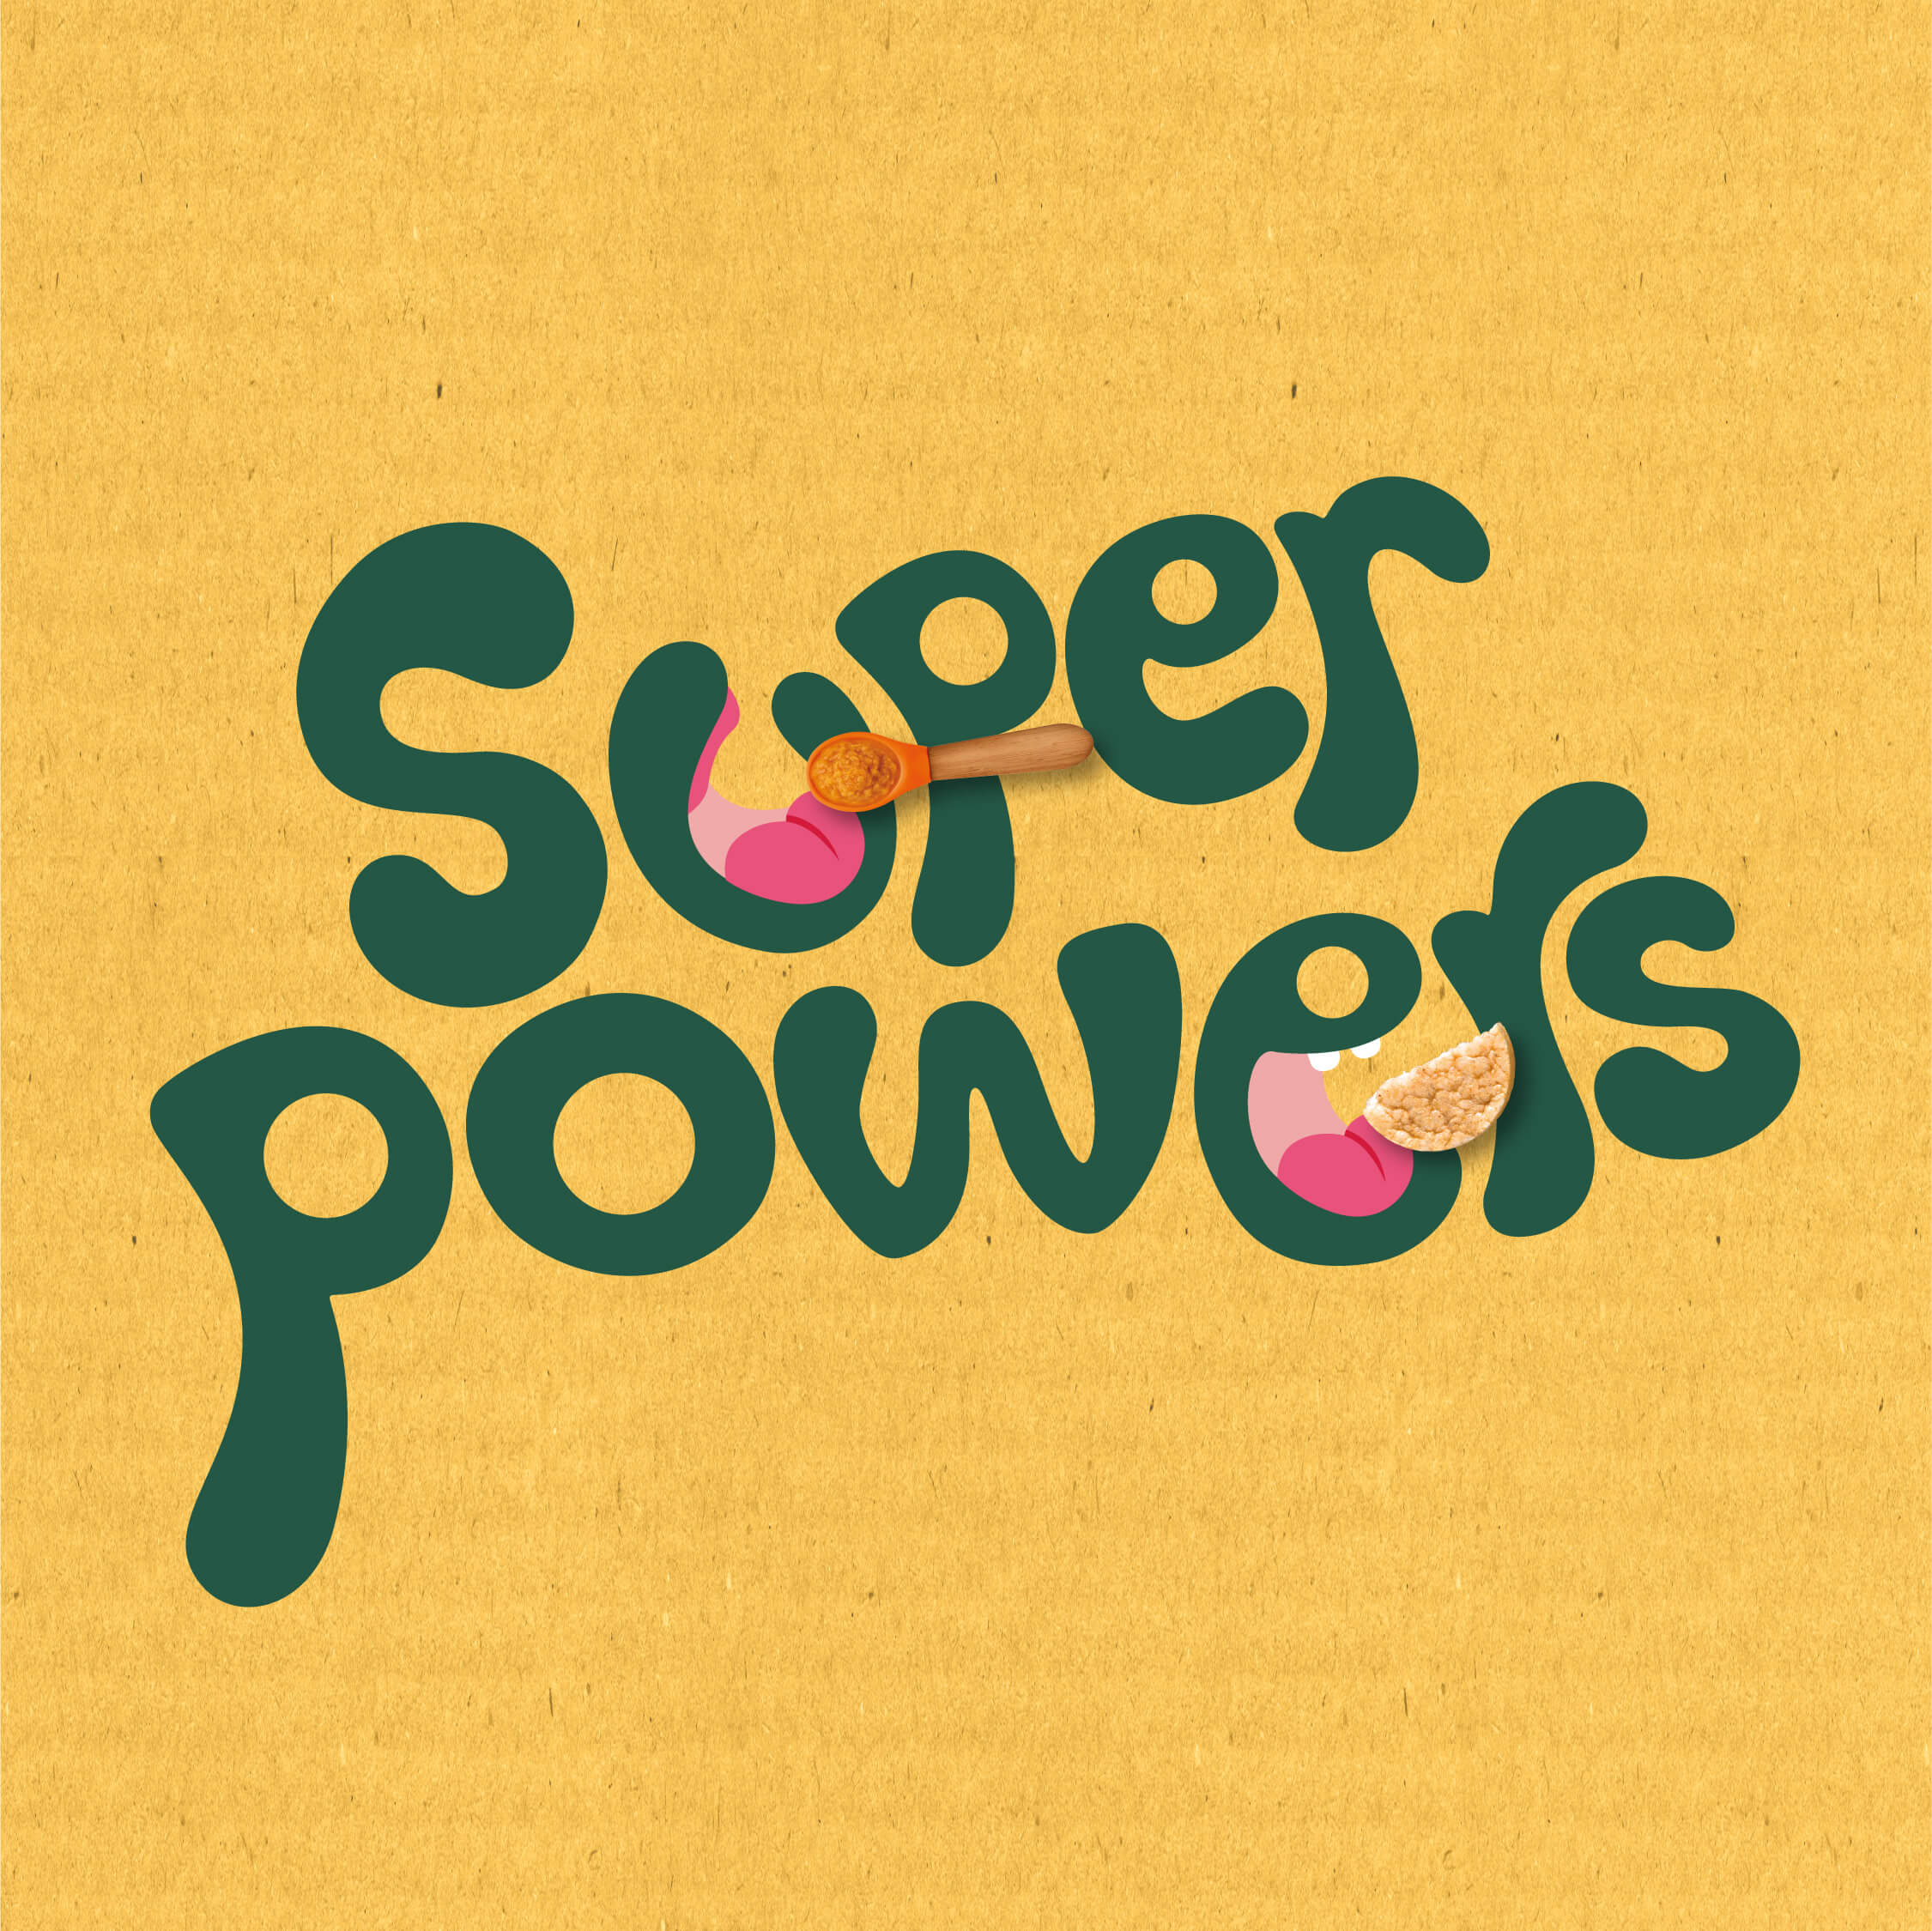 Organix green text that says "super powers" on an orange background